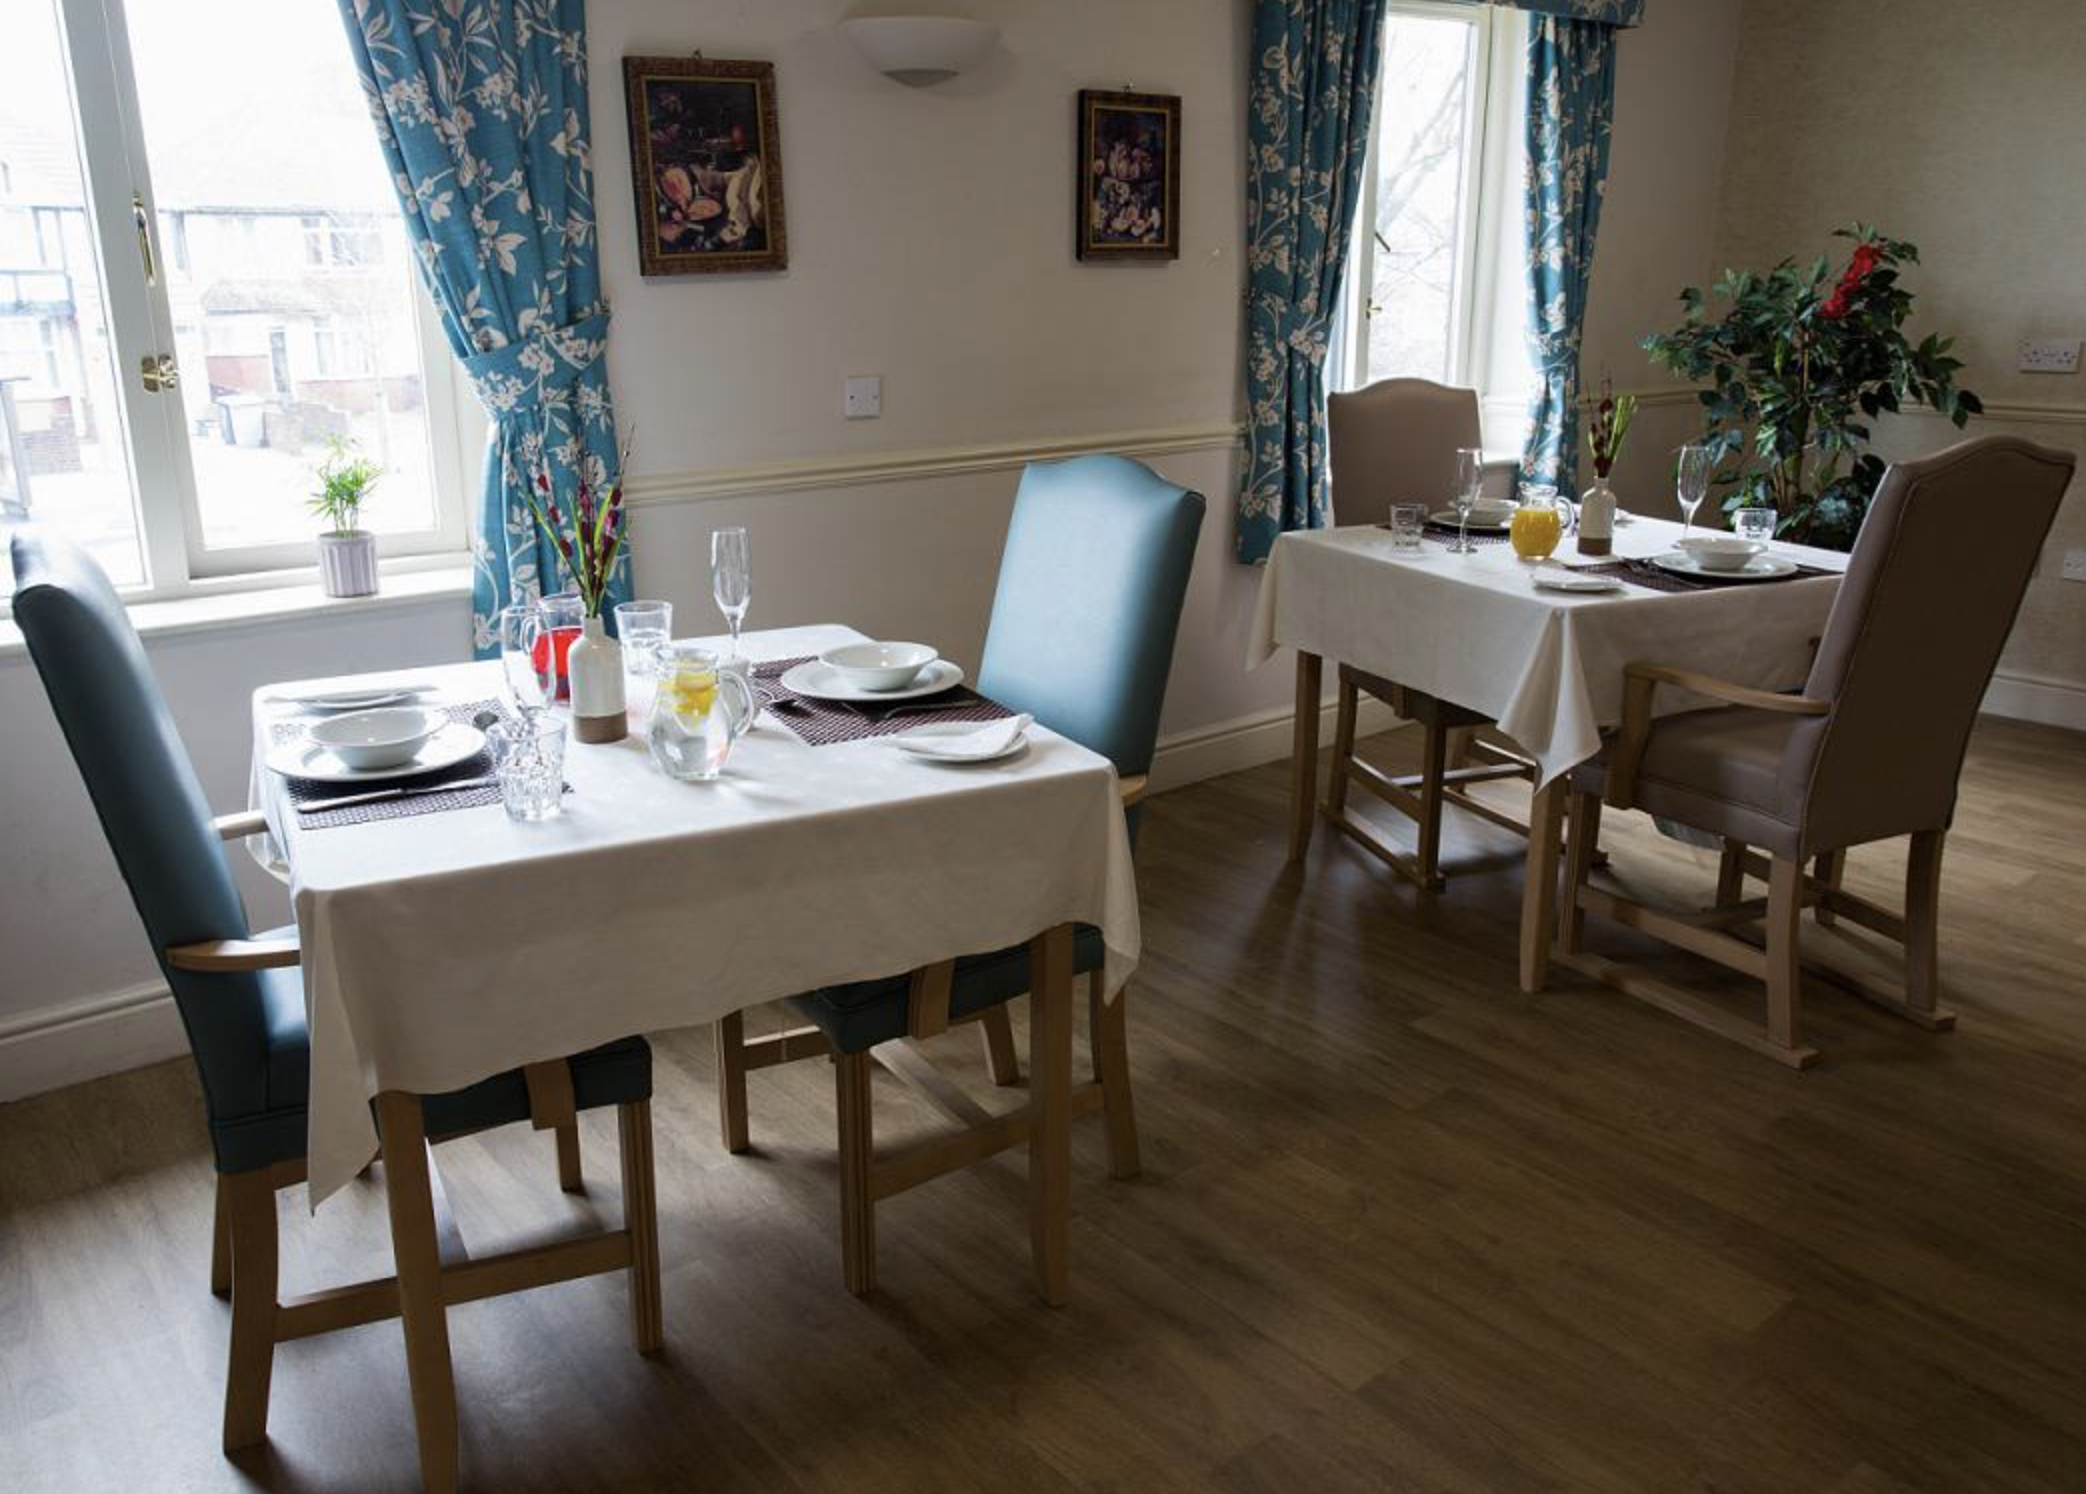 Dining room of Middlesex Manor care home in Wembley, London